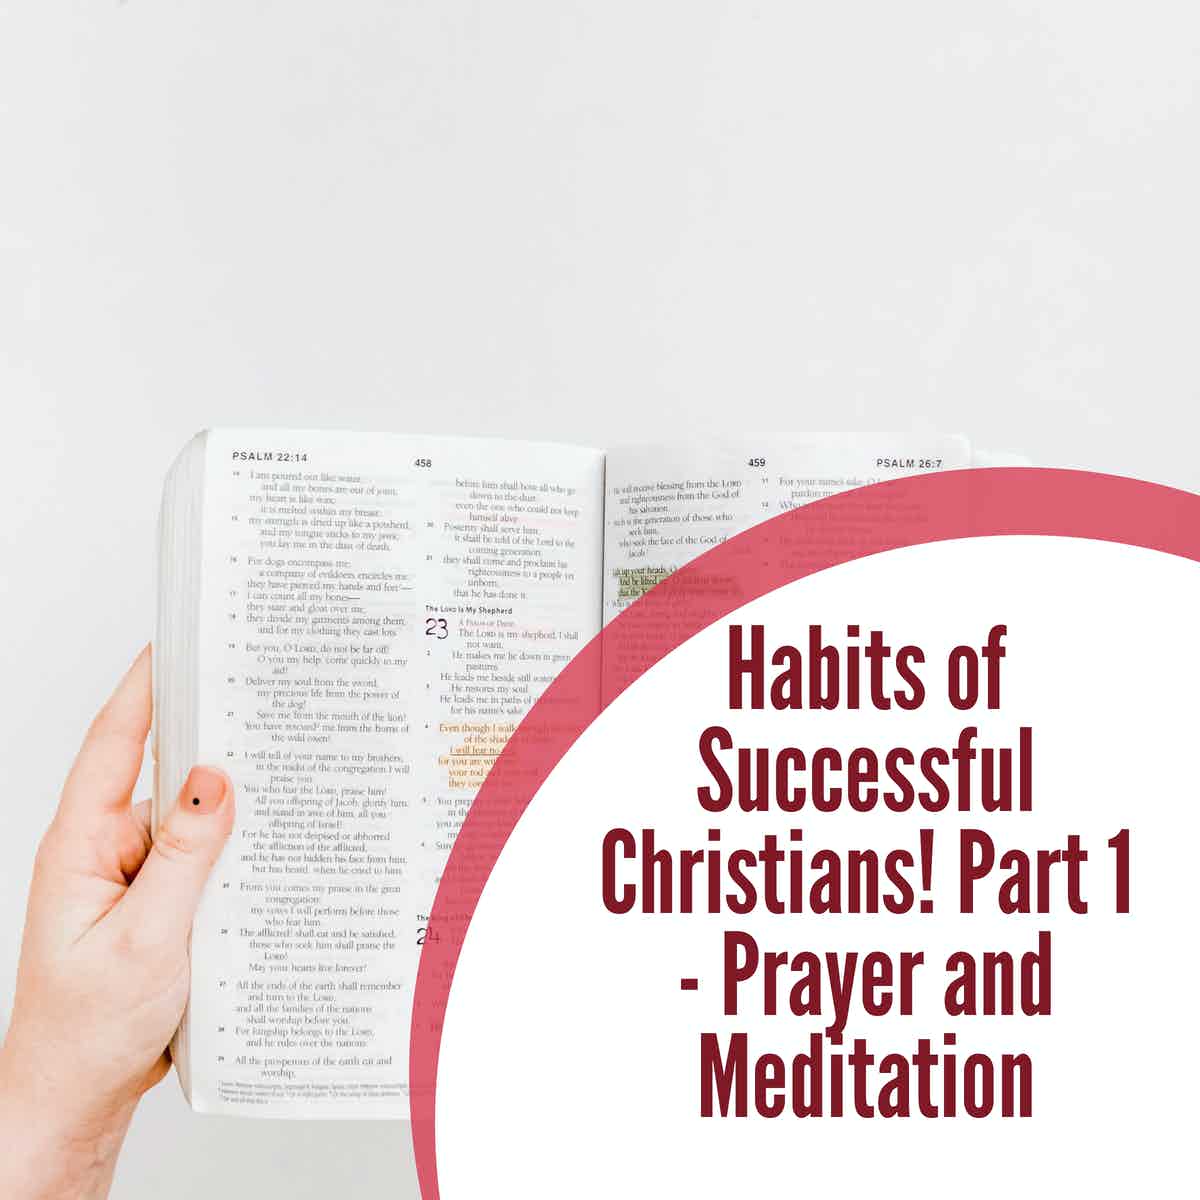 Habits of Successful Christians! Part 1 - Prayer and Meditation